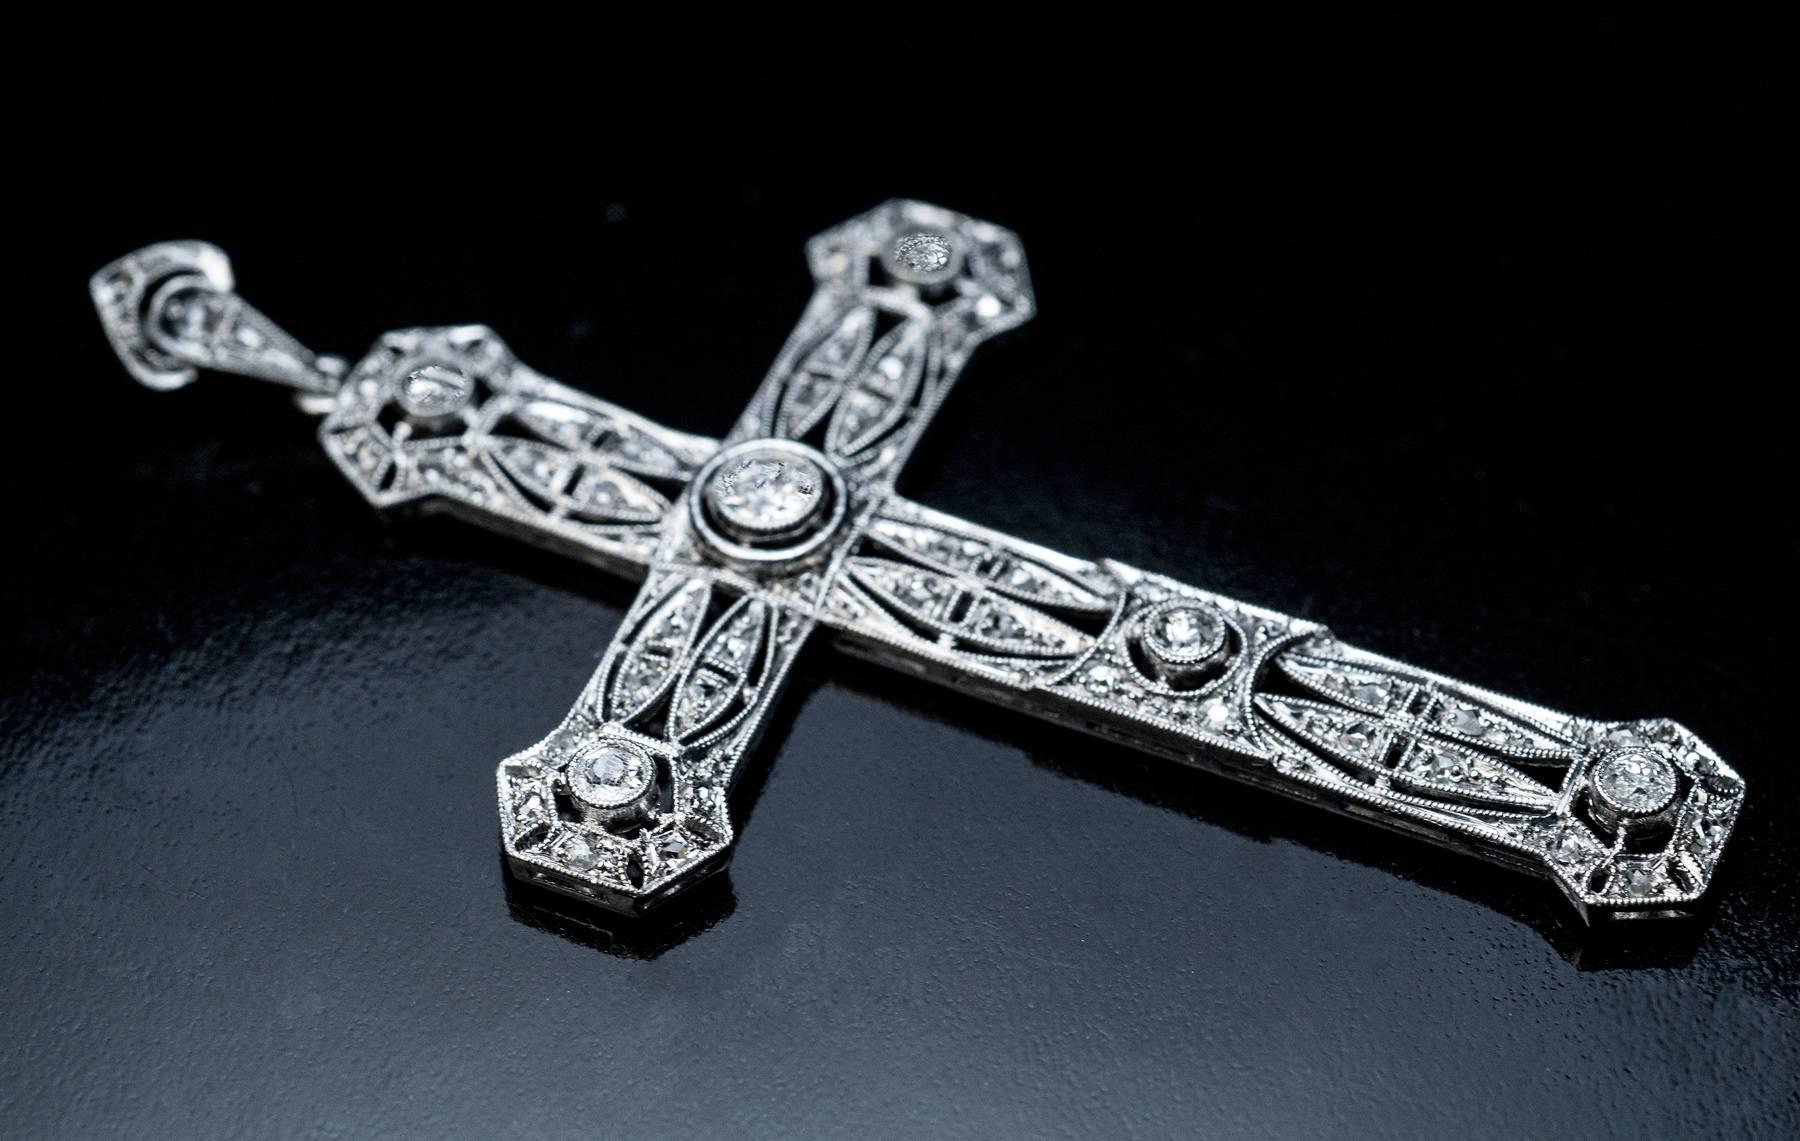 Circa 1910

This large Edwardian era antique openwork cross pendant is handmade in platinum and embellished with old European and rose cut diamonds.

Estimated total diamond weight is 0.80 ct.

Total length with bail 65 mm (2 1/2 in.)